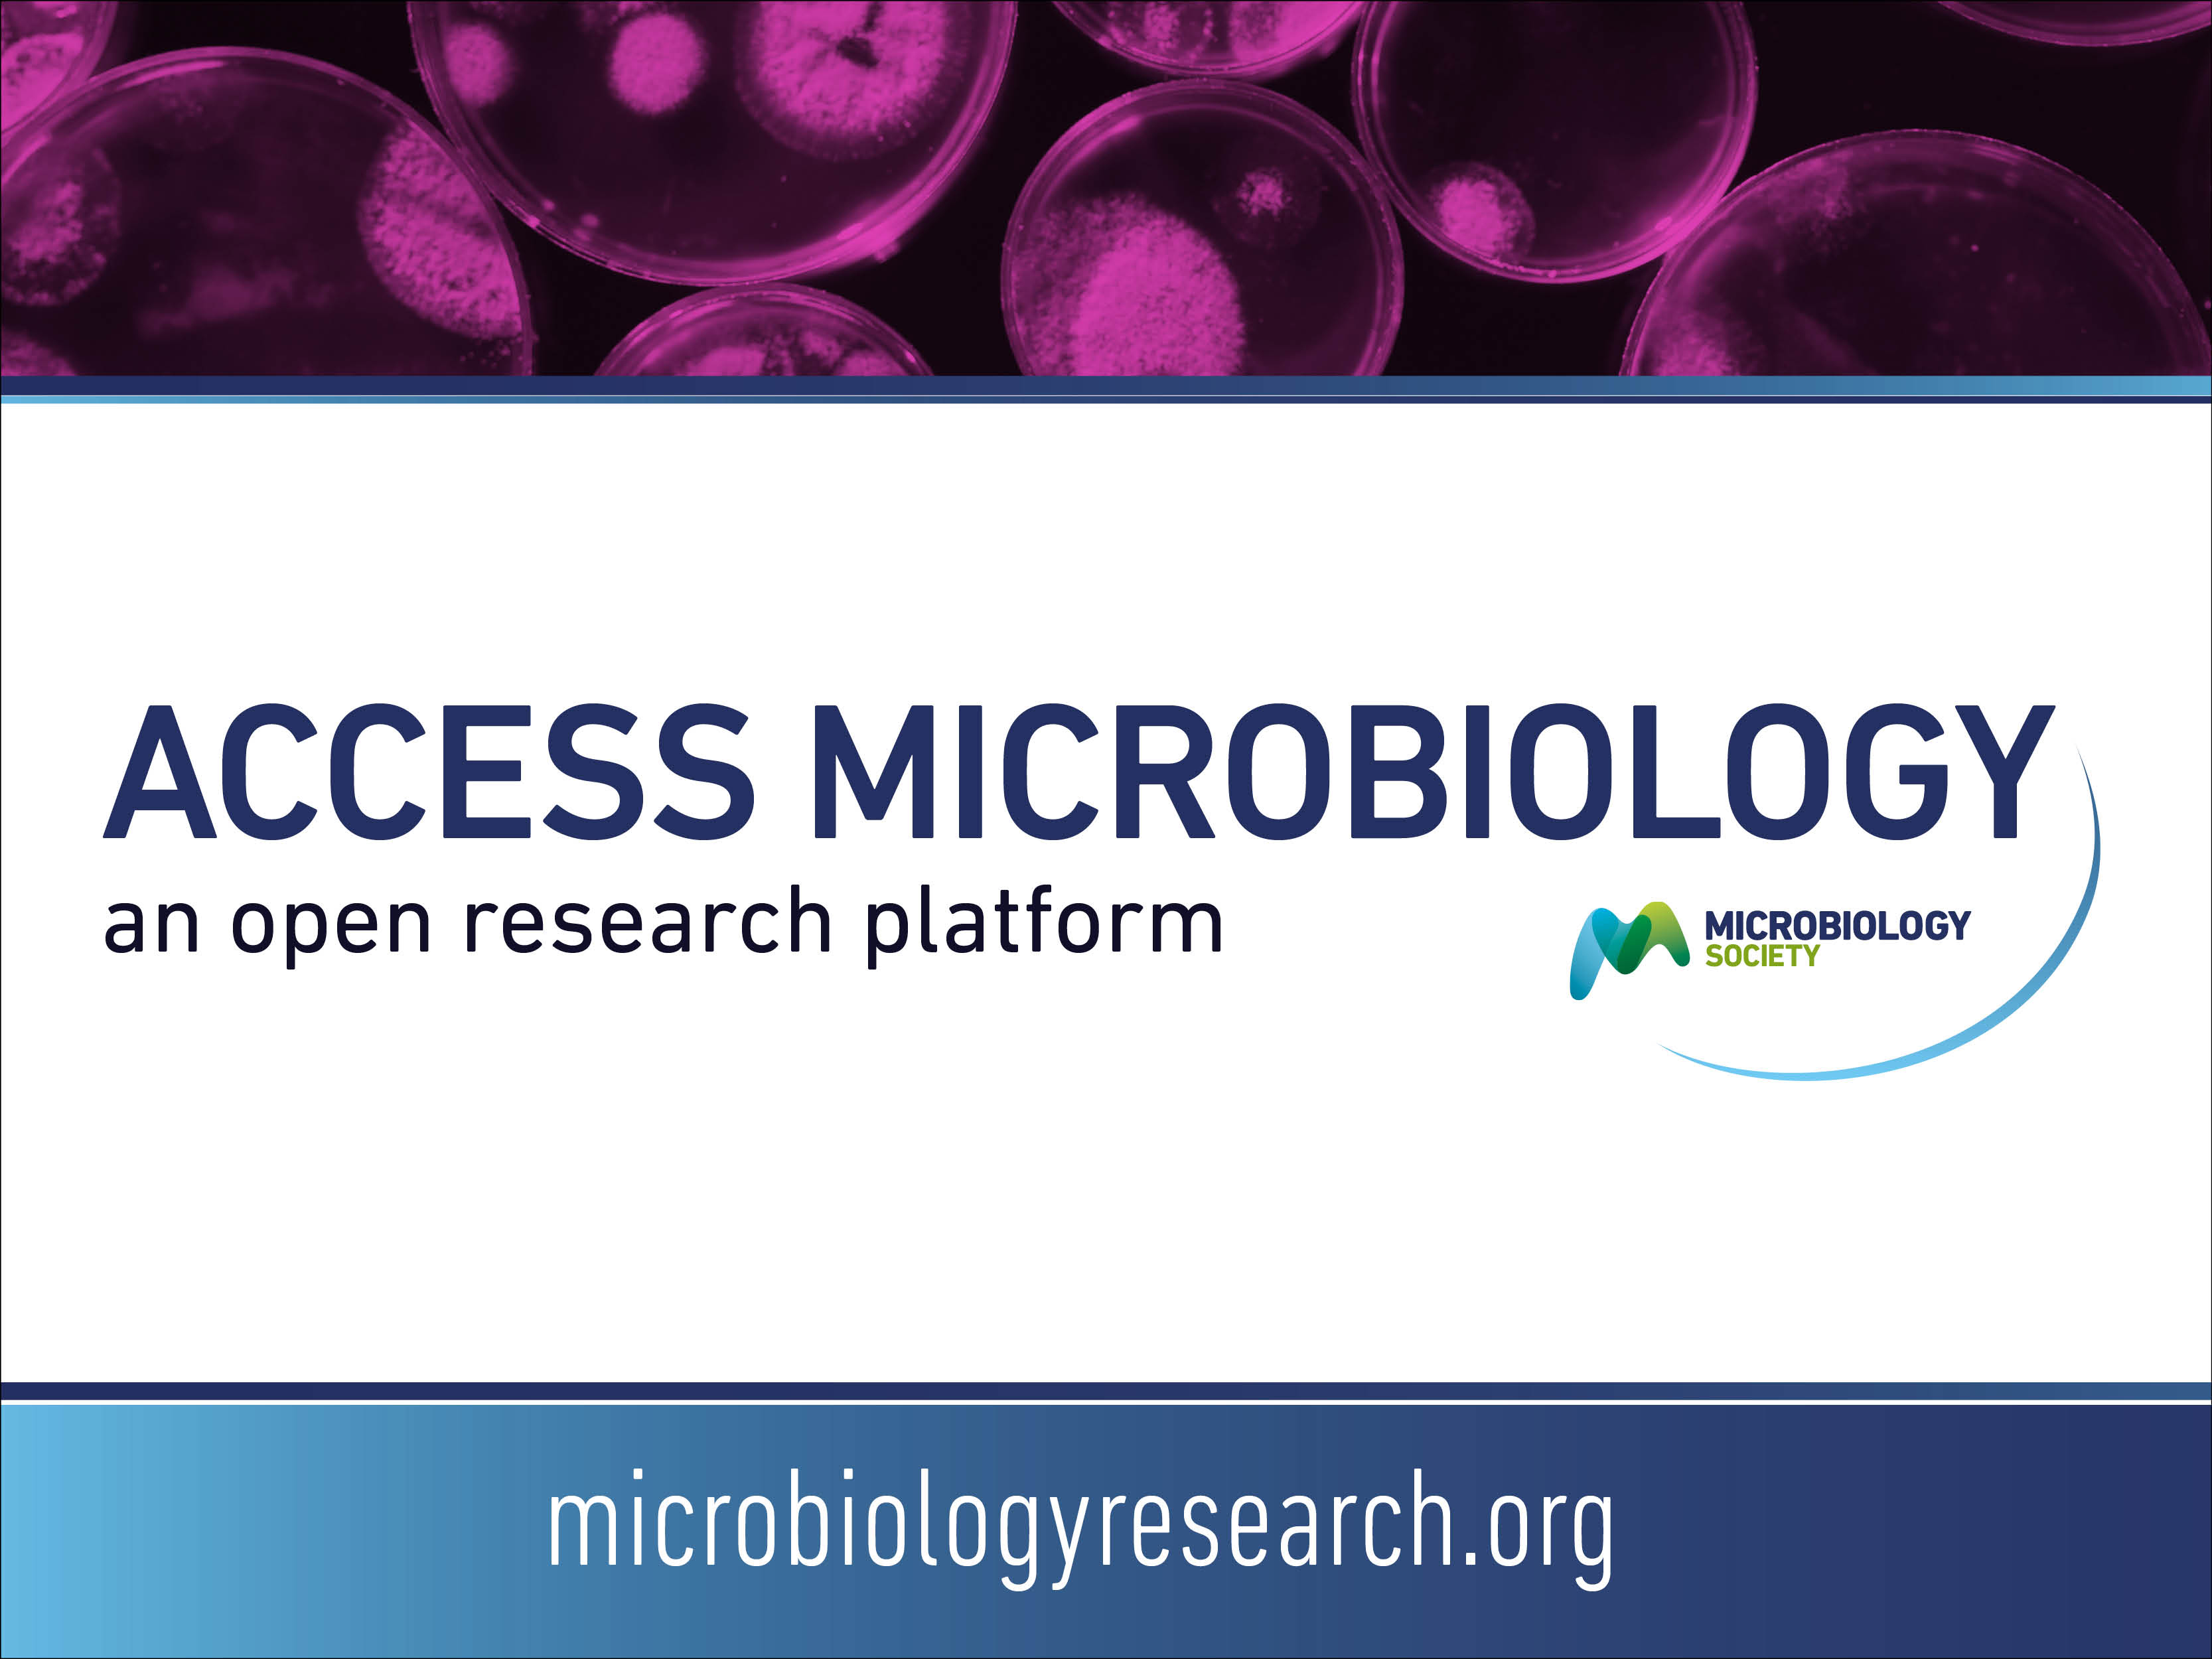 Microbiology Society launches an innovative open research platfor